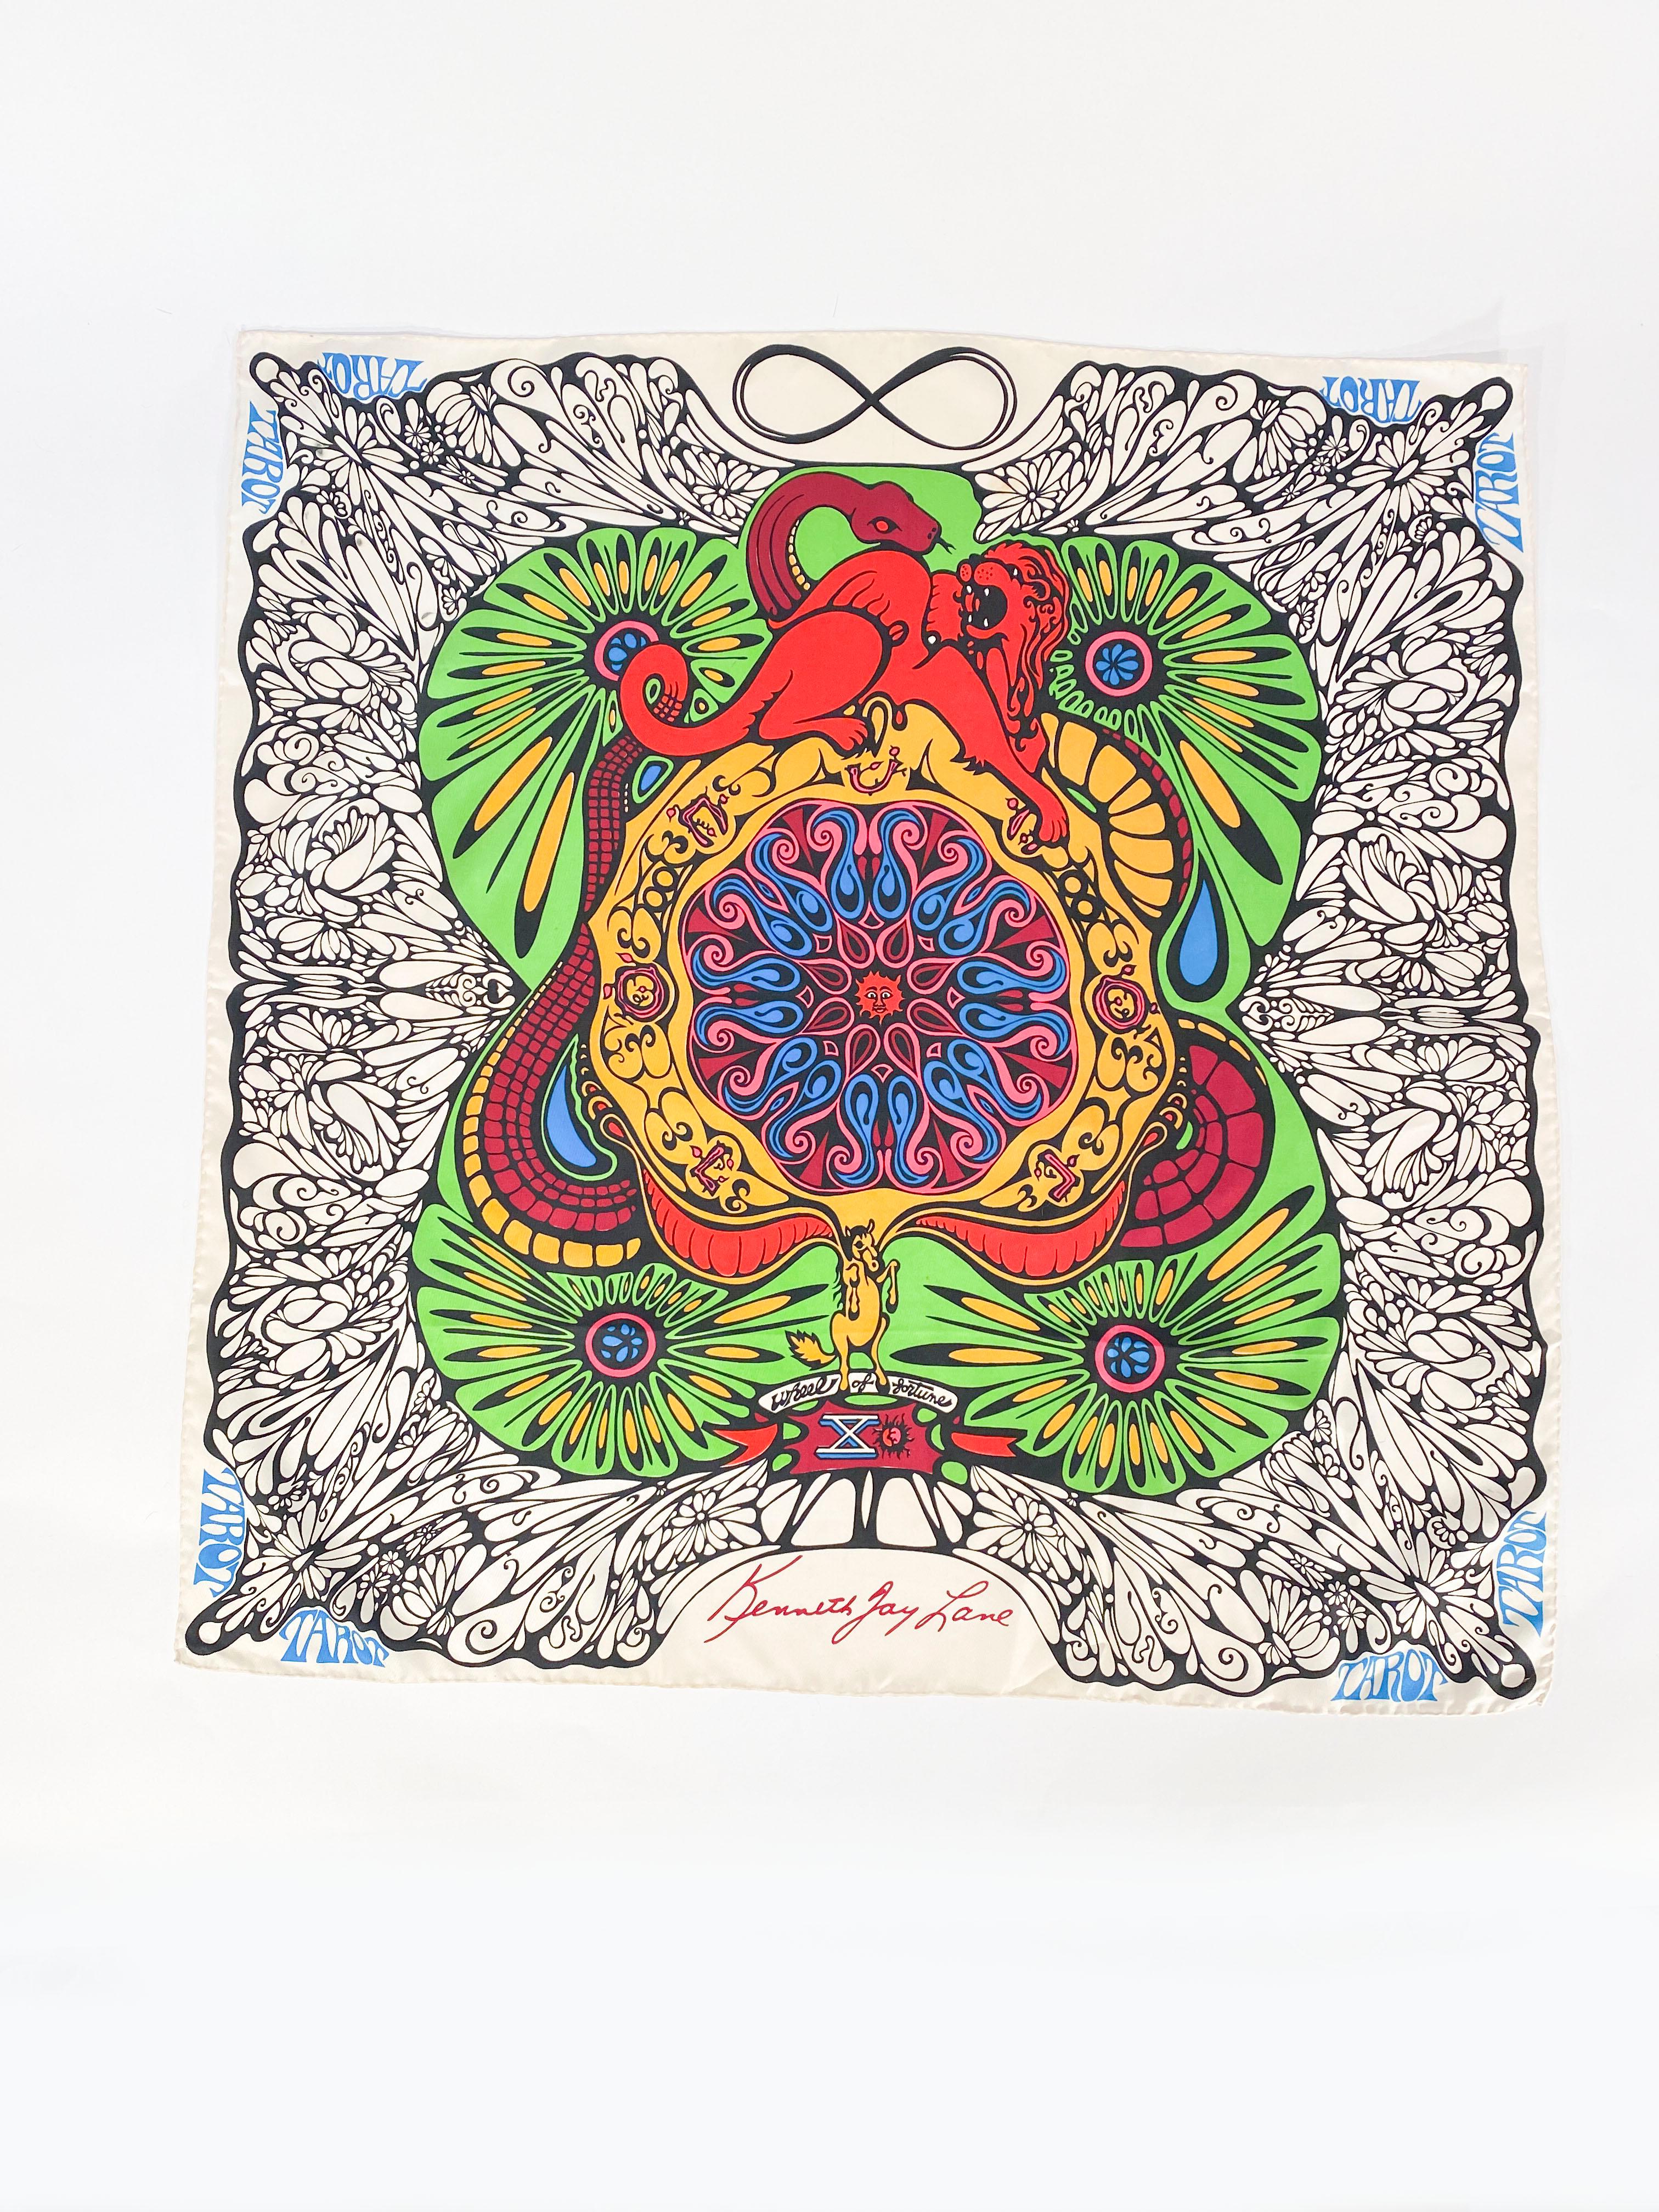 1970s Kenneth Jay Lane psychedelic printed scarf featuring psychedelic motifs in green, yellow, pink, blues, and black. The edges are hand rolled and the fore-color is a cream that creates a stark contrast with the bold line work in the illustration.